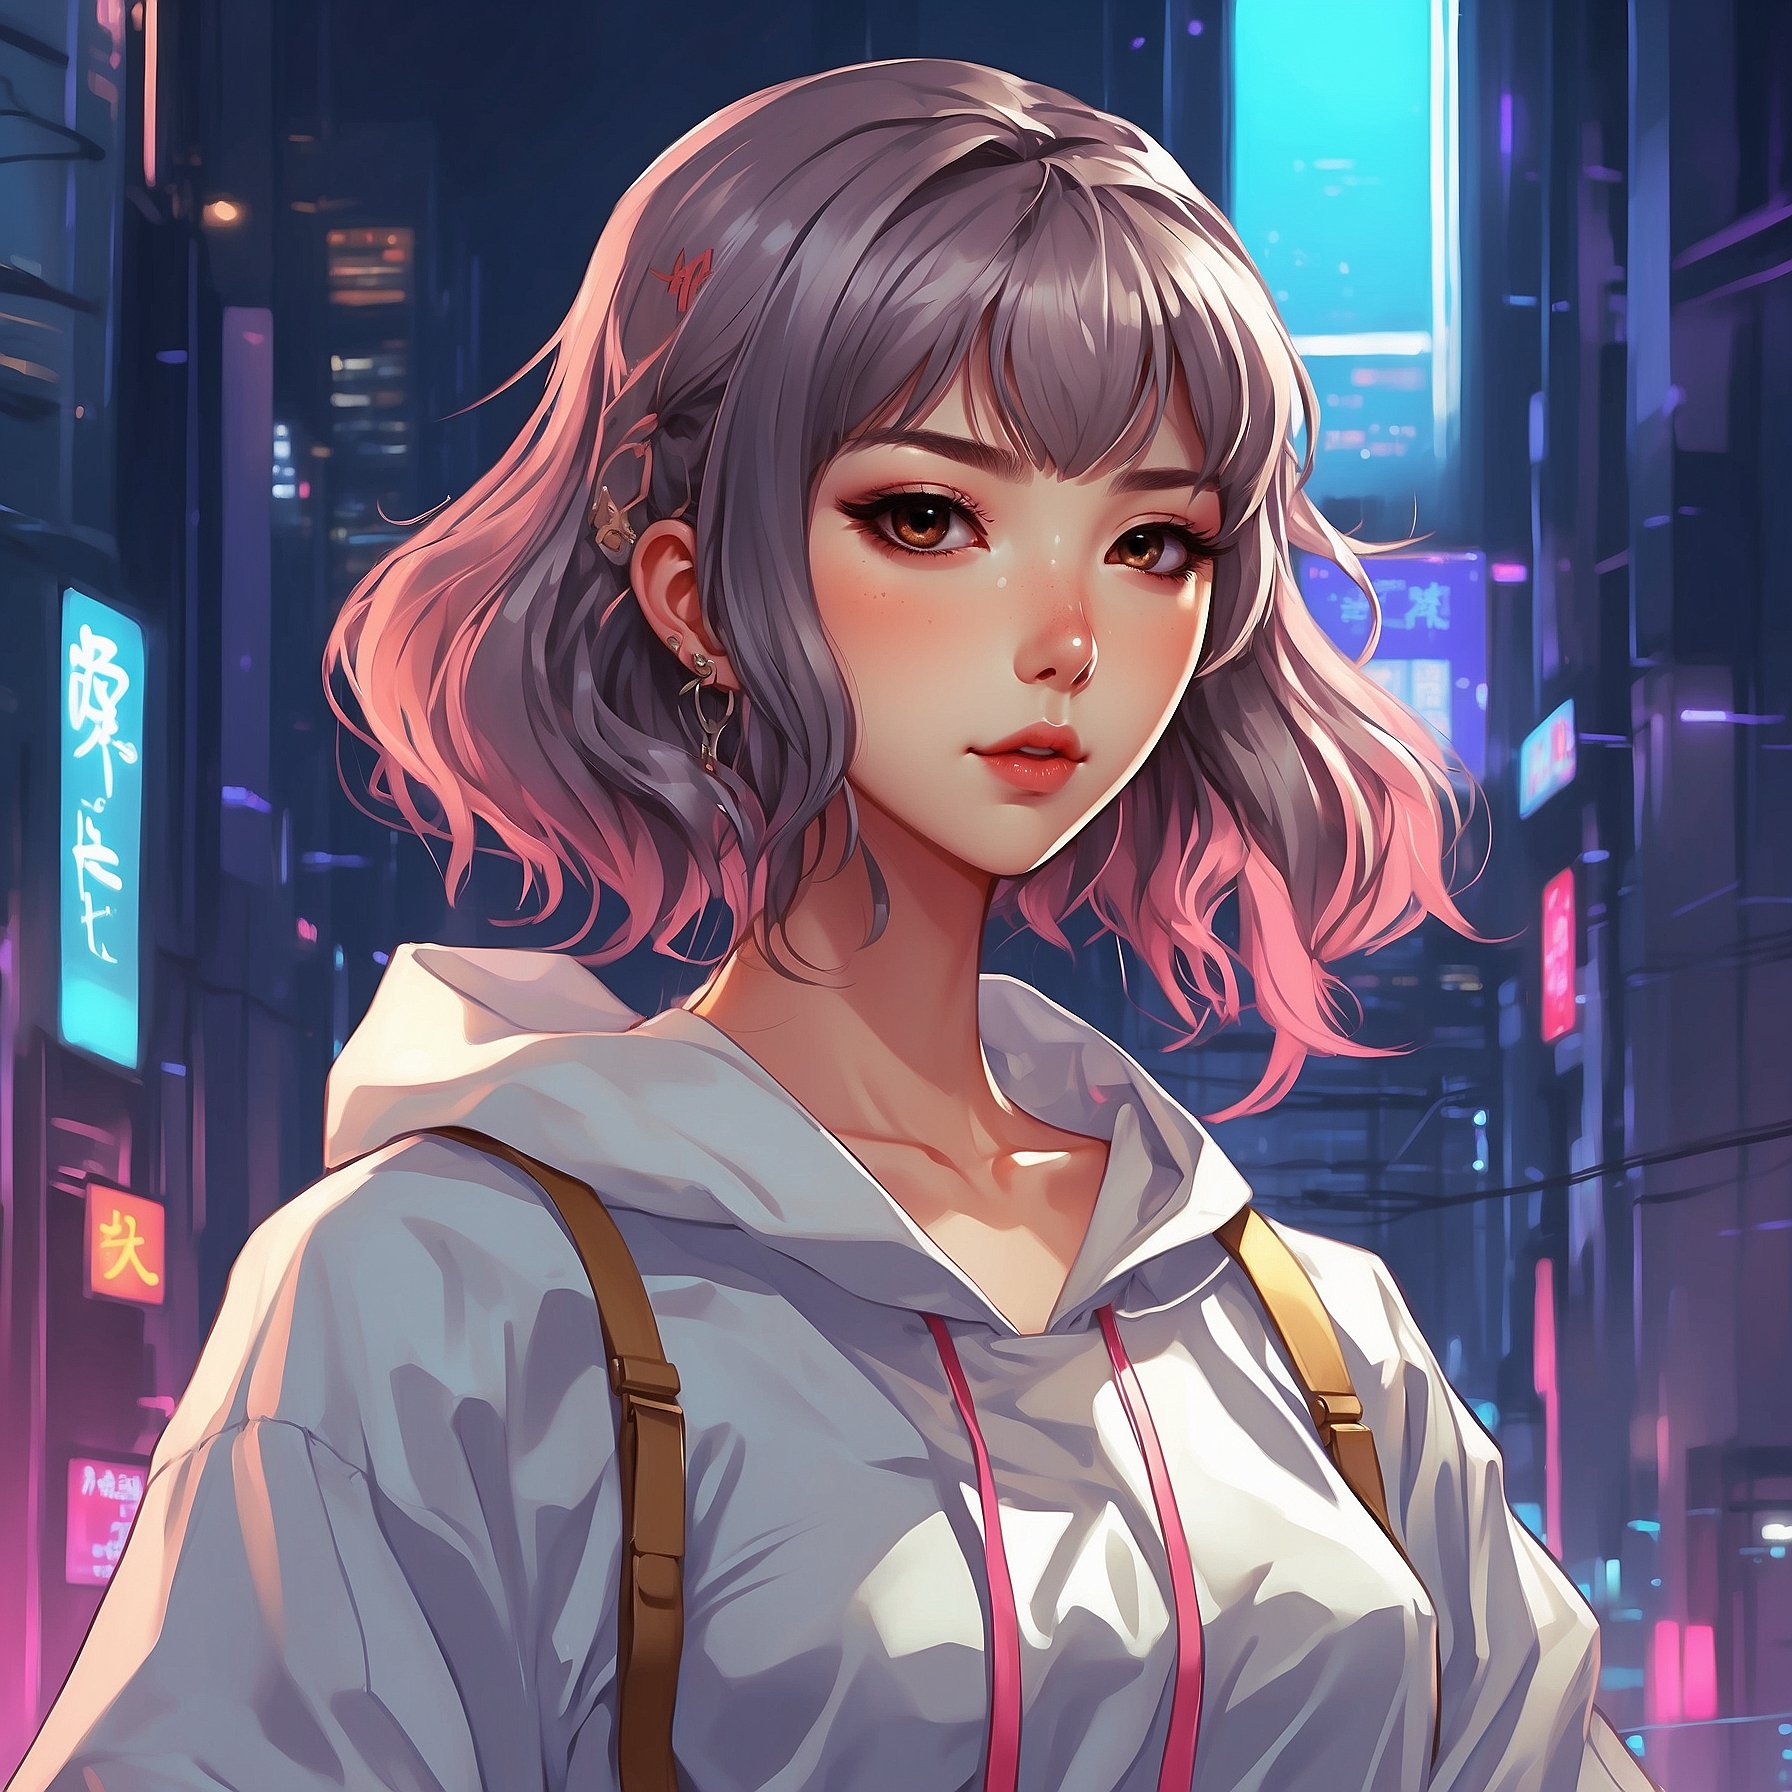 AI Artwork Generated by Leonardo AI - Anime Girl In the City, shared on the LaPrompt marketplace.